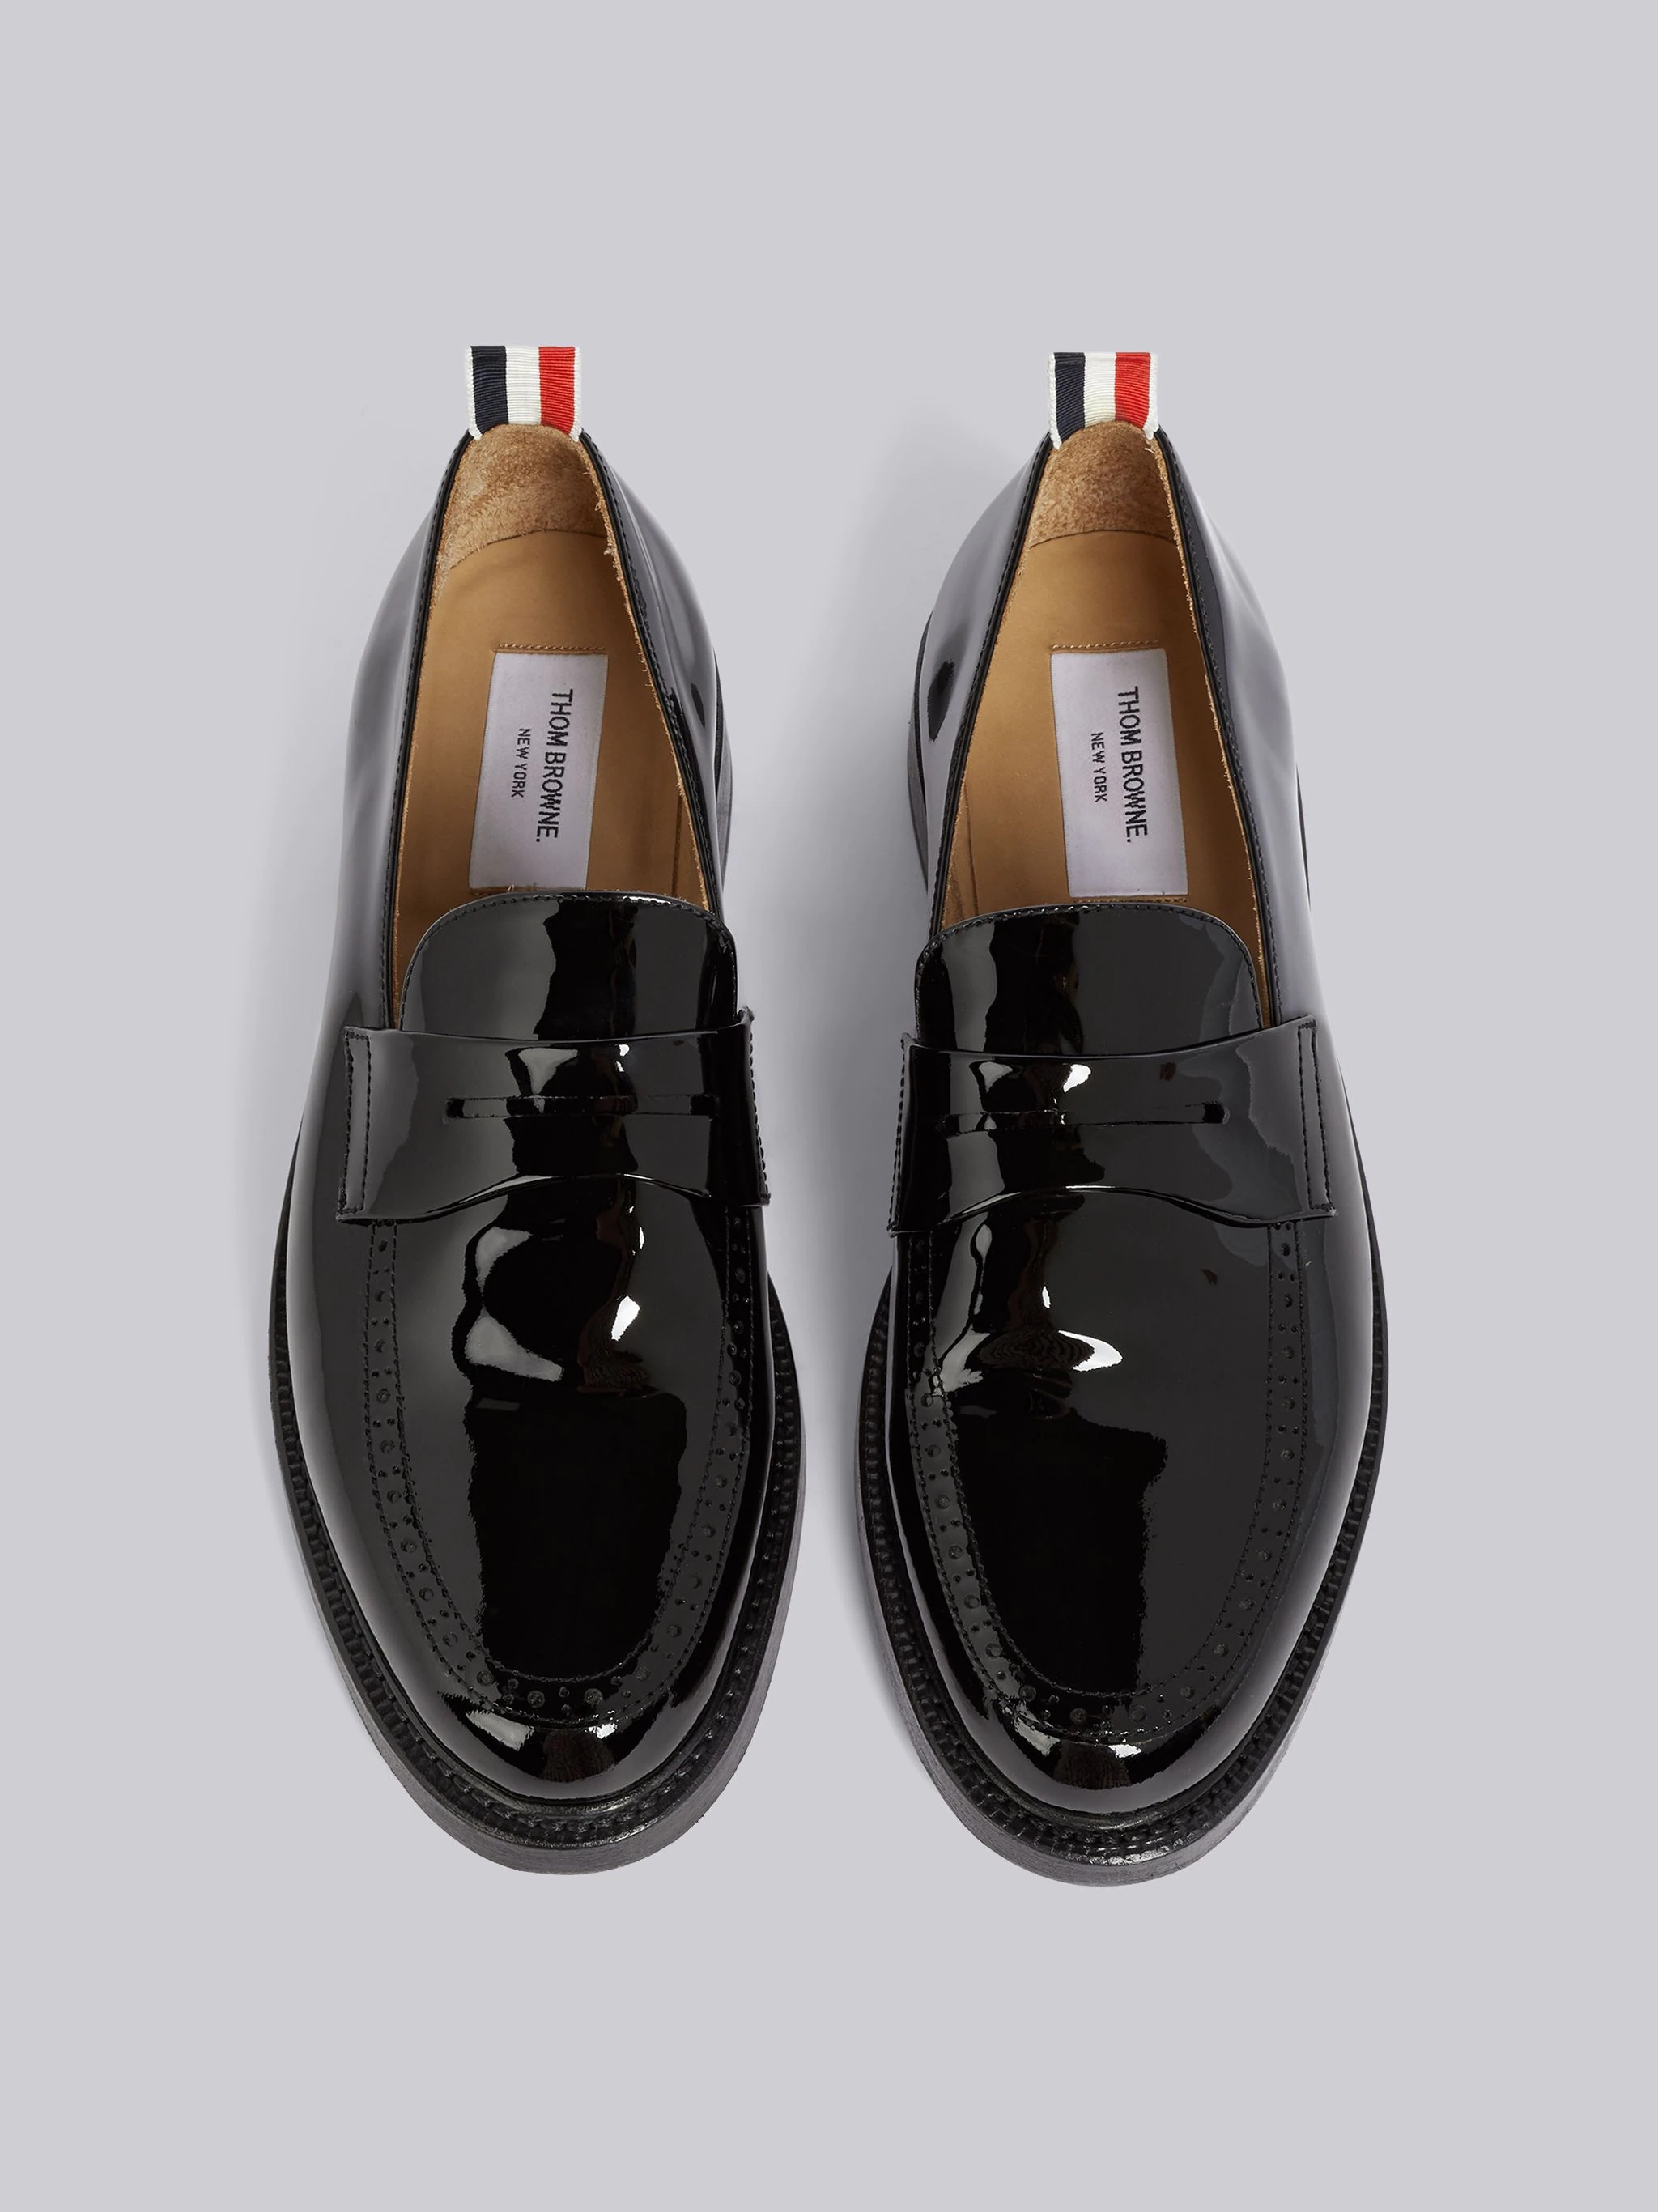 Black Patent Leather Penny Loafer - 4